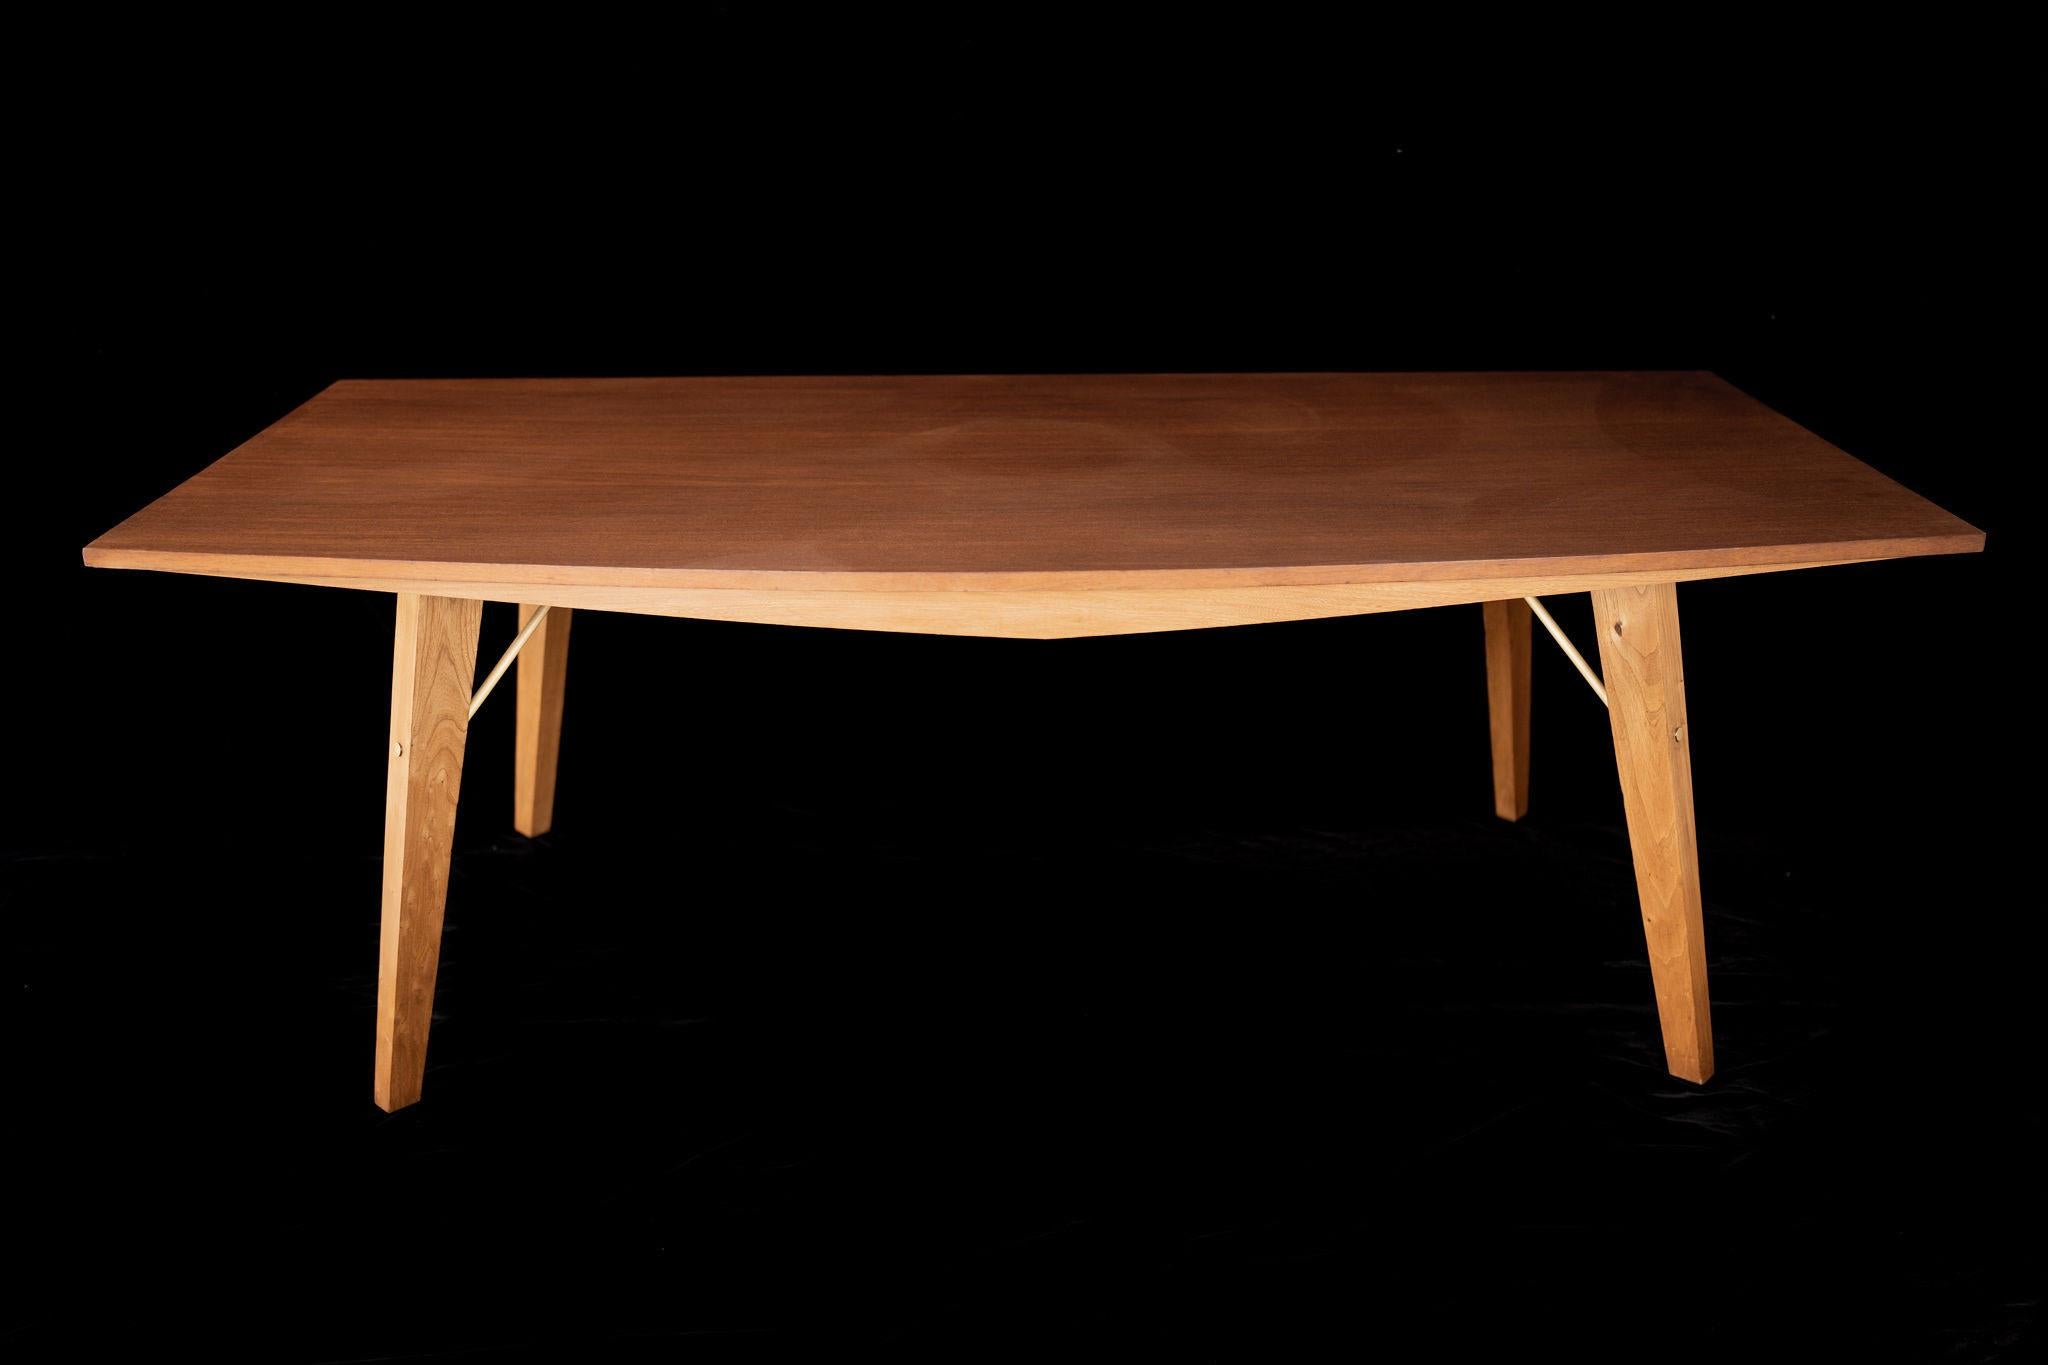 Mexican Mid-Century Modern Dining Table by El Ancora